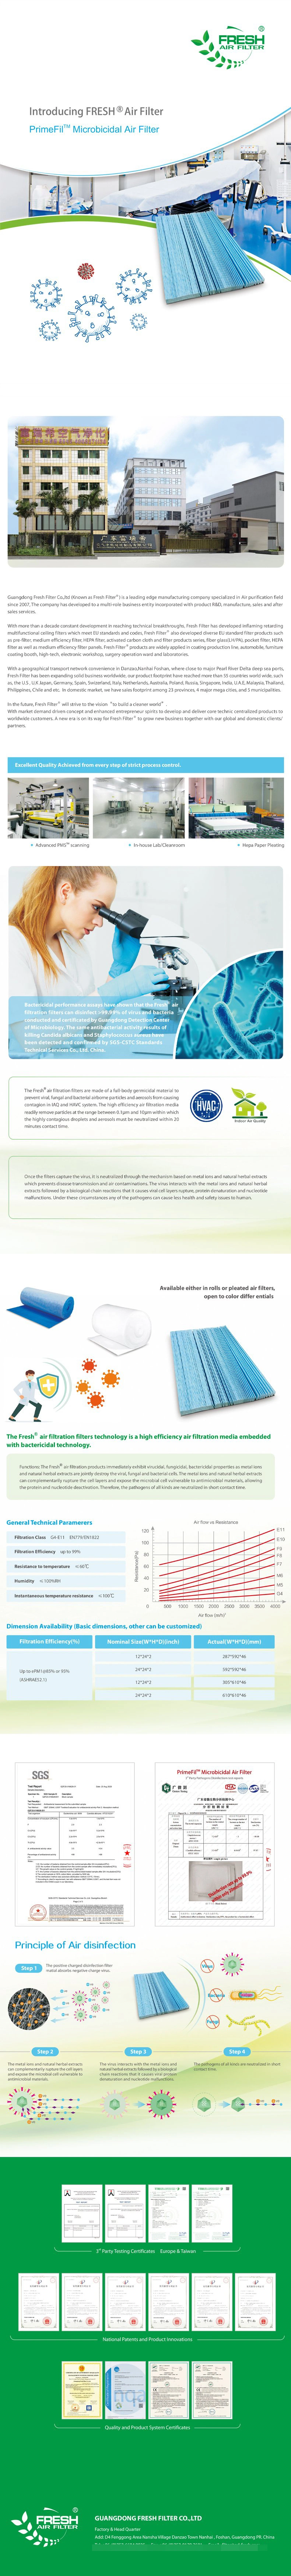 Microbicidal Air Filter Set and Air Filter Media for Virus Disinfection